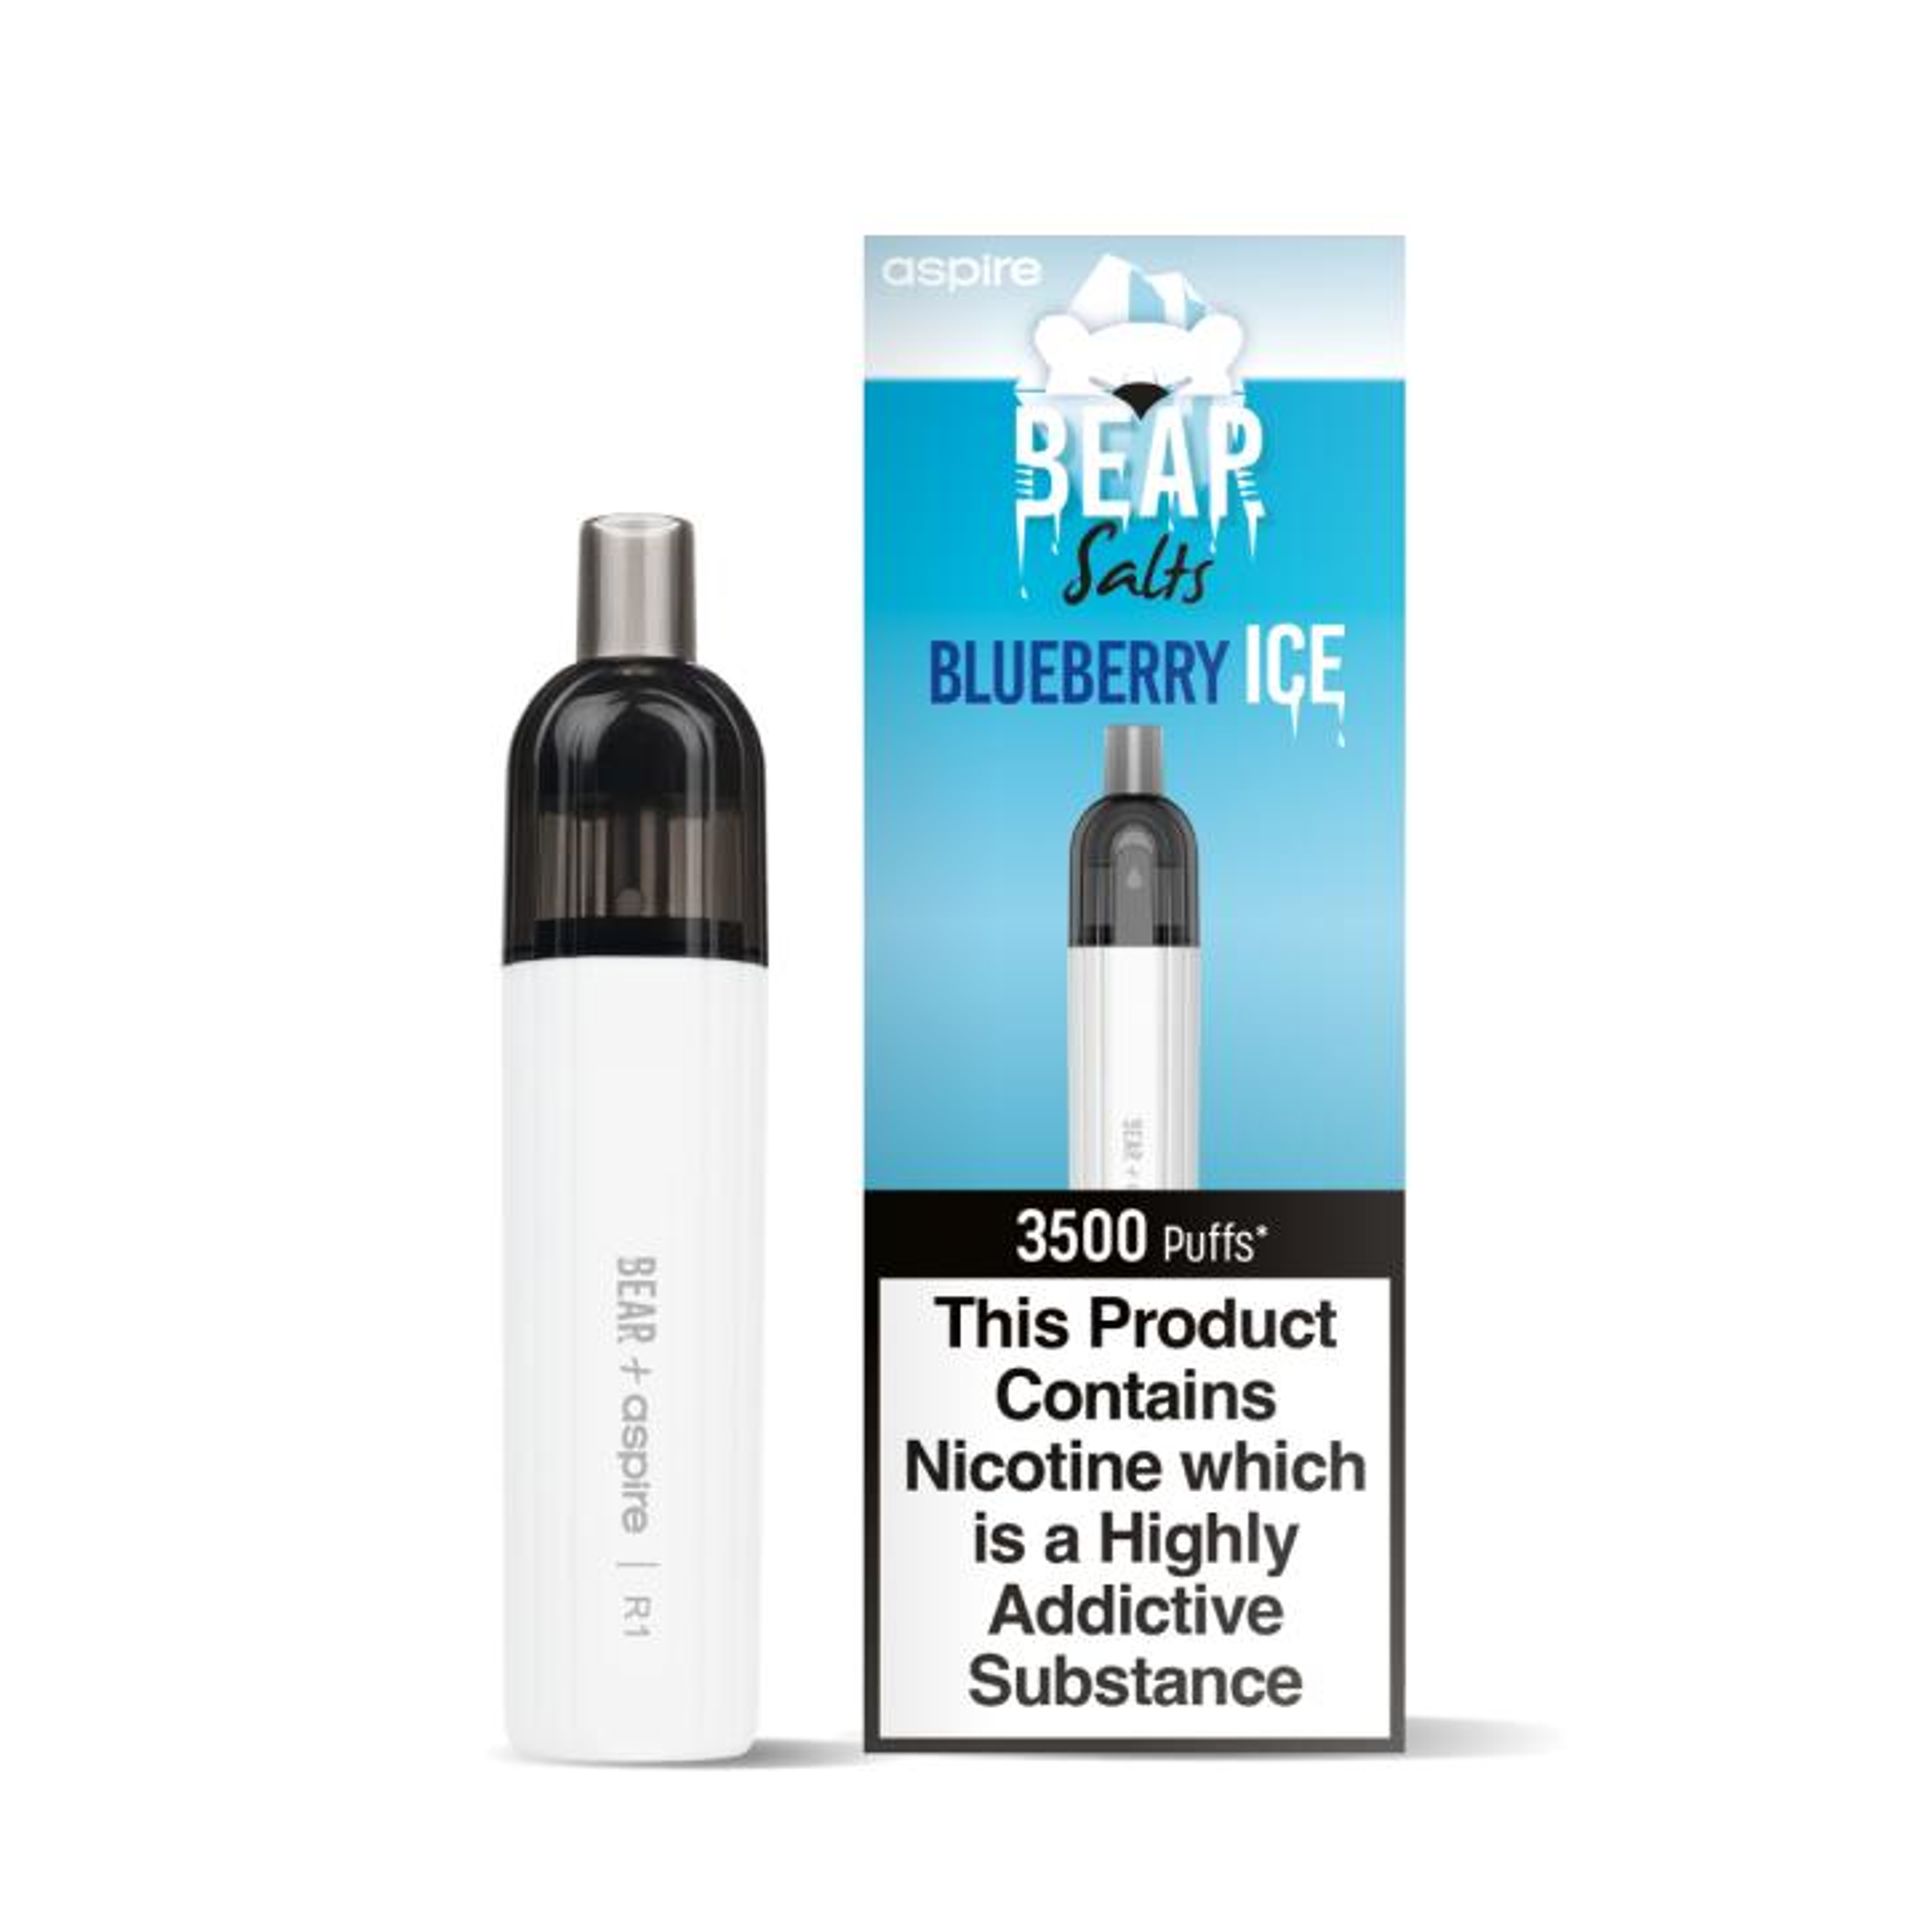 Image of Blueberry Ice by Bear Aspire R1